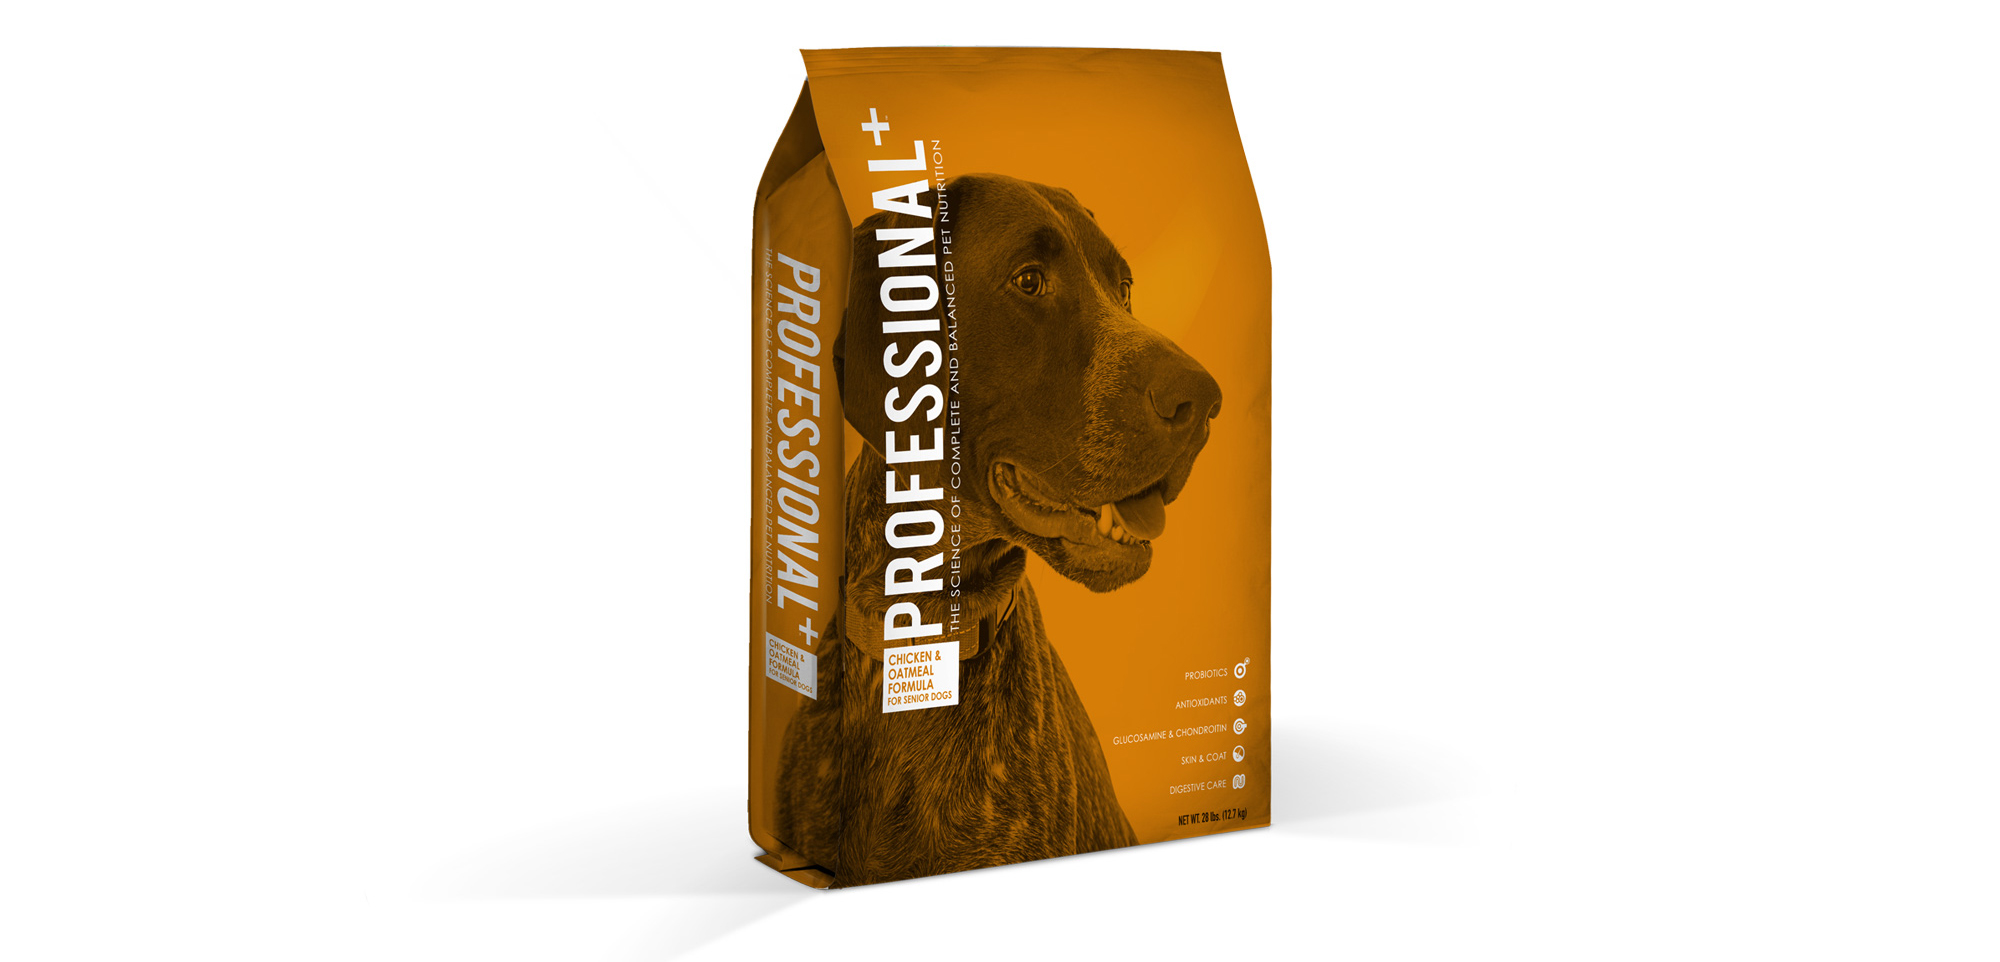 Professional+ Chicken and Oatmeal Formula for Senior Dogs